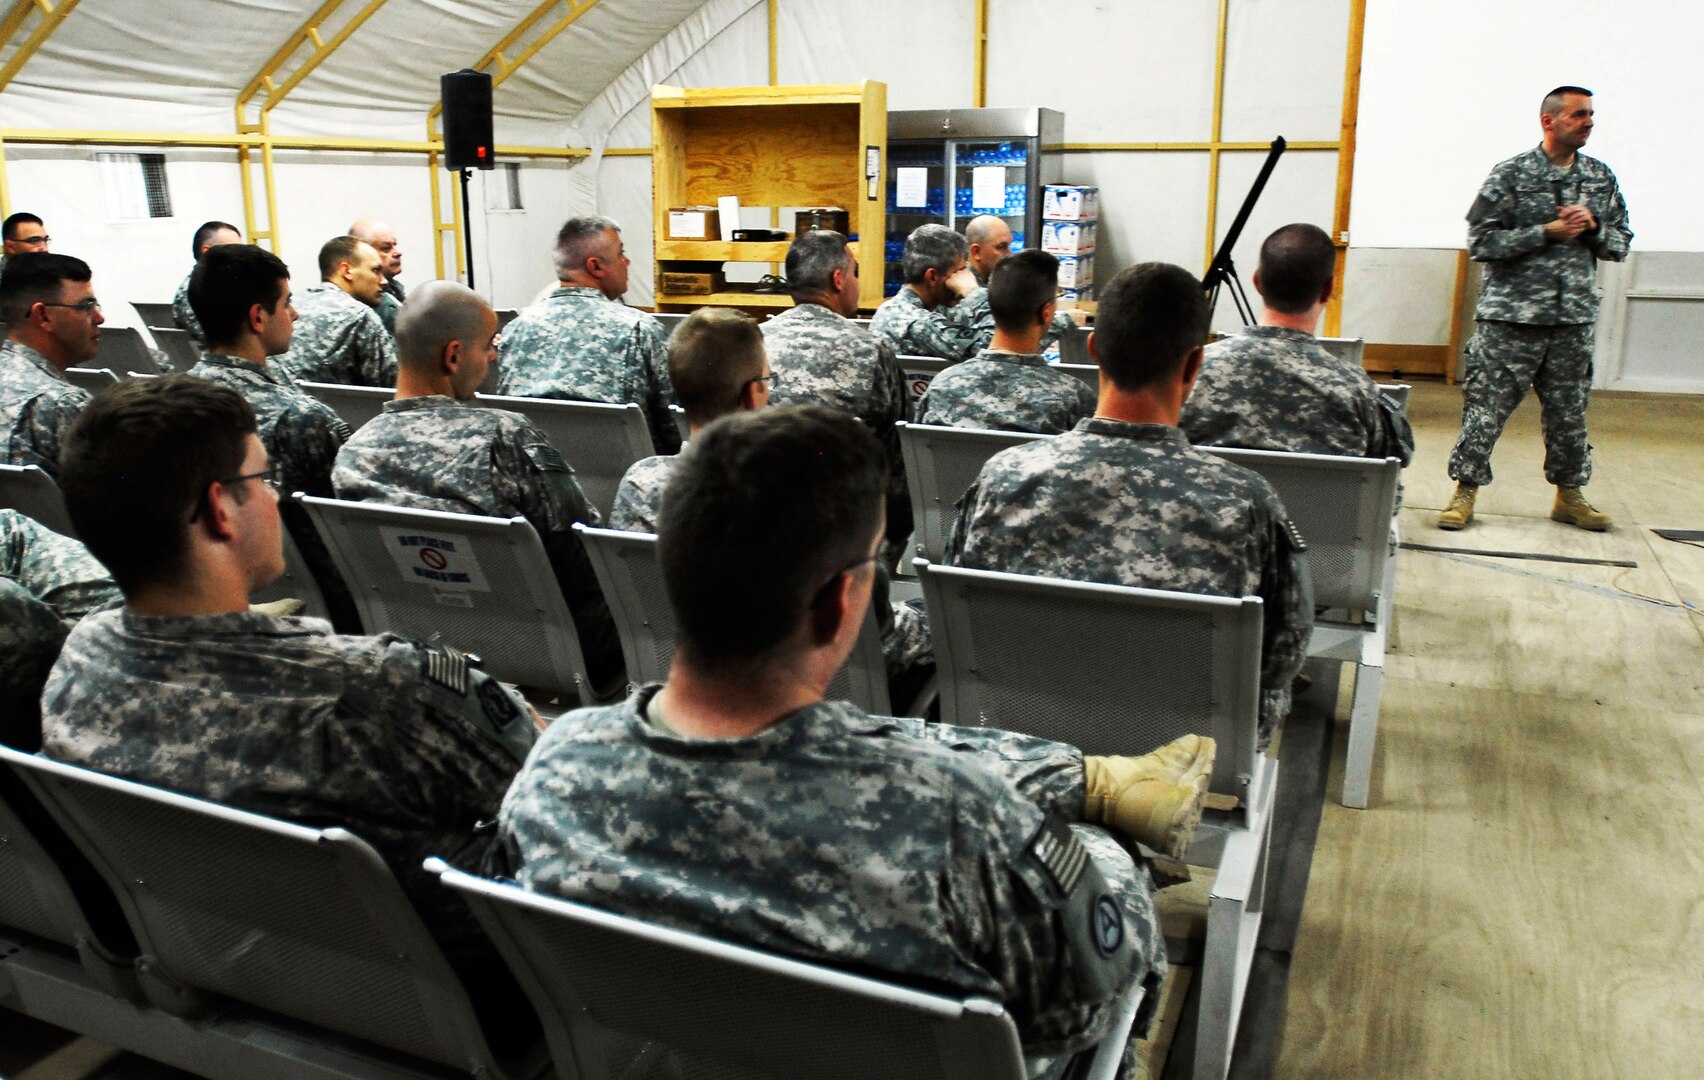 Wyoming Army National Guard Chief of Staff, Col. Greg Porter, briefs a group of Wyoming Soldiers about the current state of Wyoming and the road to demobilization during a visit to Camp Virginia, Kuwait, on Jan. 18, 2010. Porter was part of a small contingency of Wyoming National Guard Joint Force Headquarters staff who visited the brigade to ensure a successful reintegration process upon the unit's return this spring.